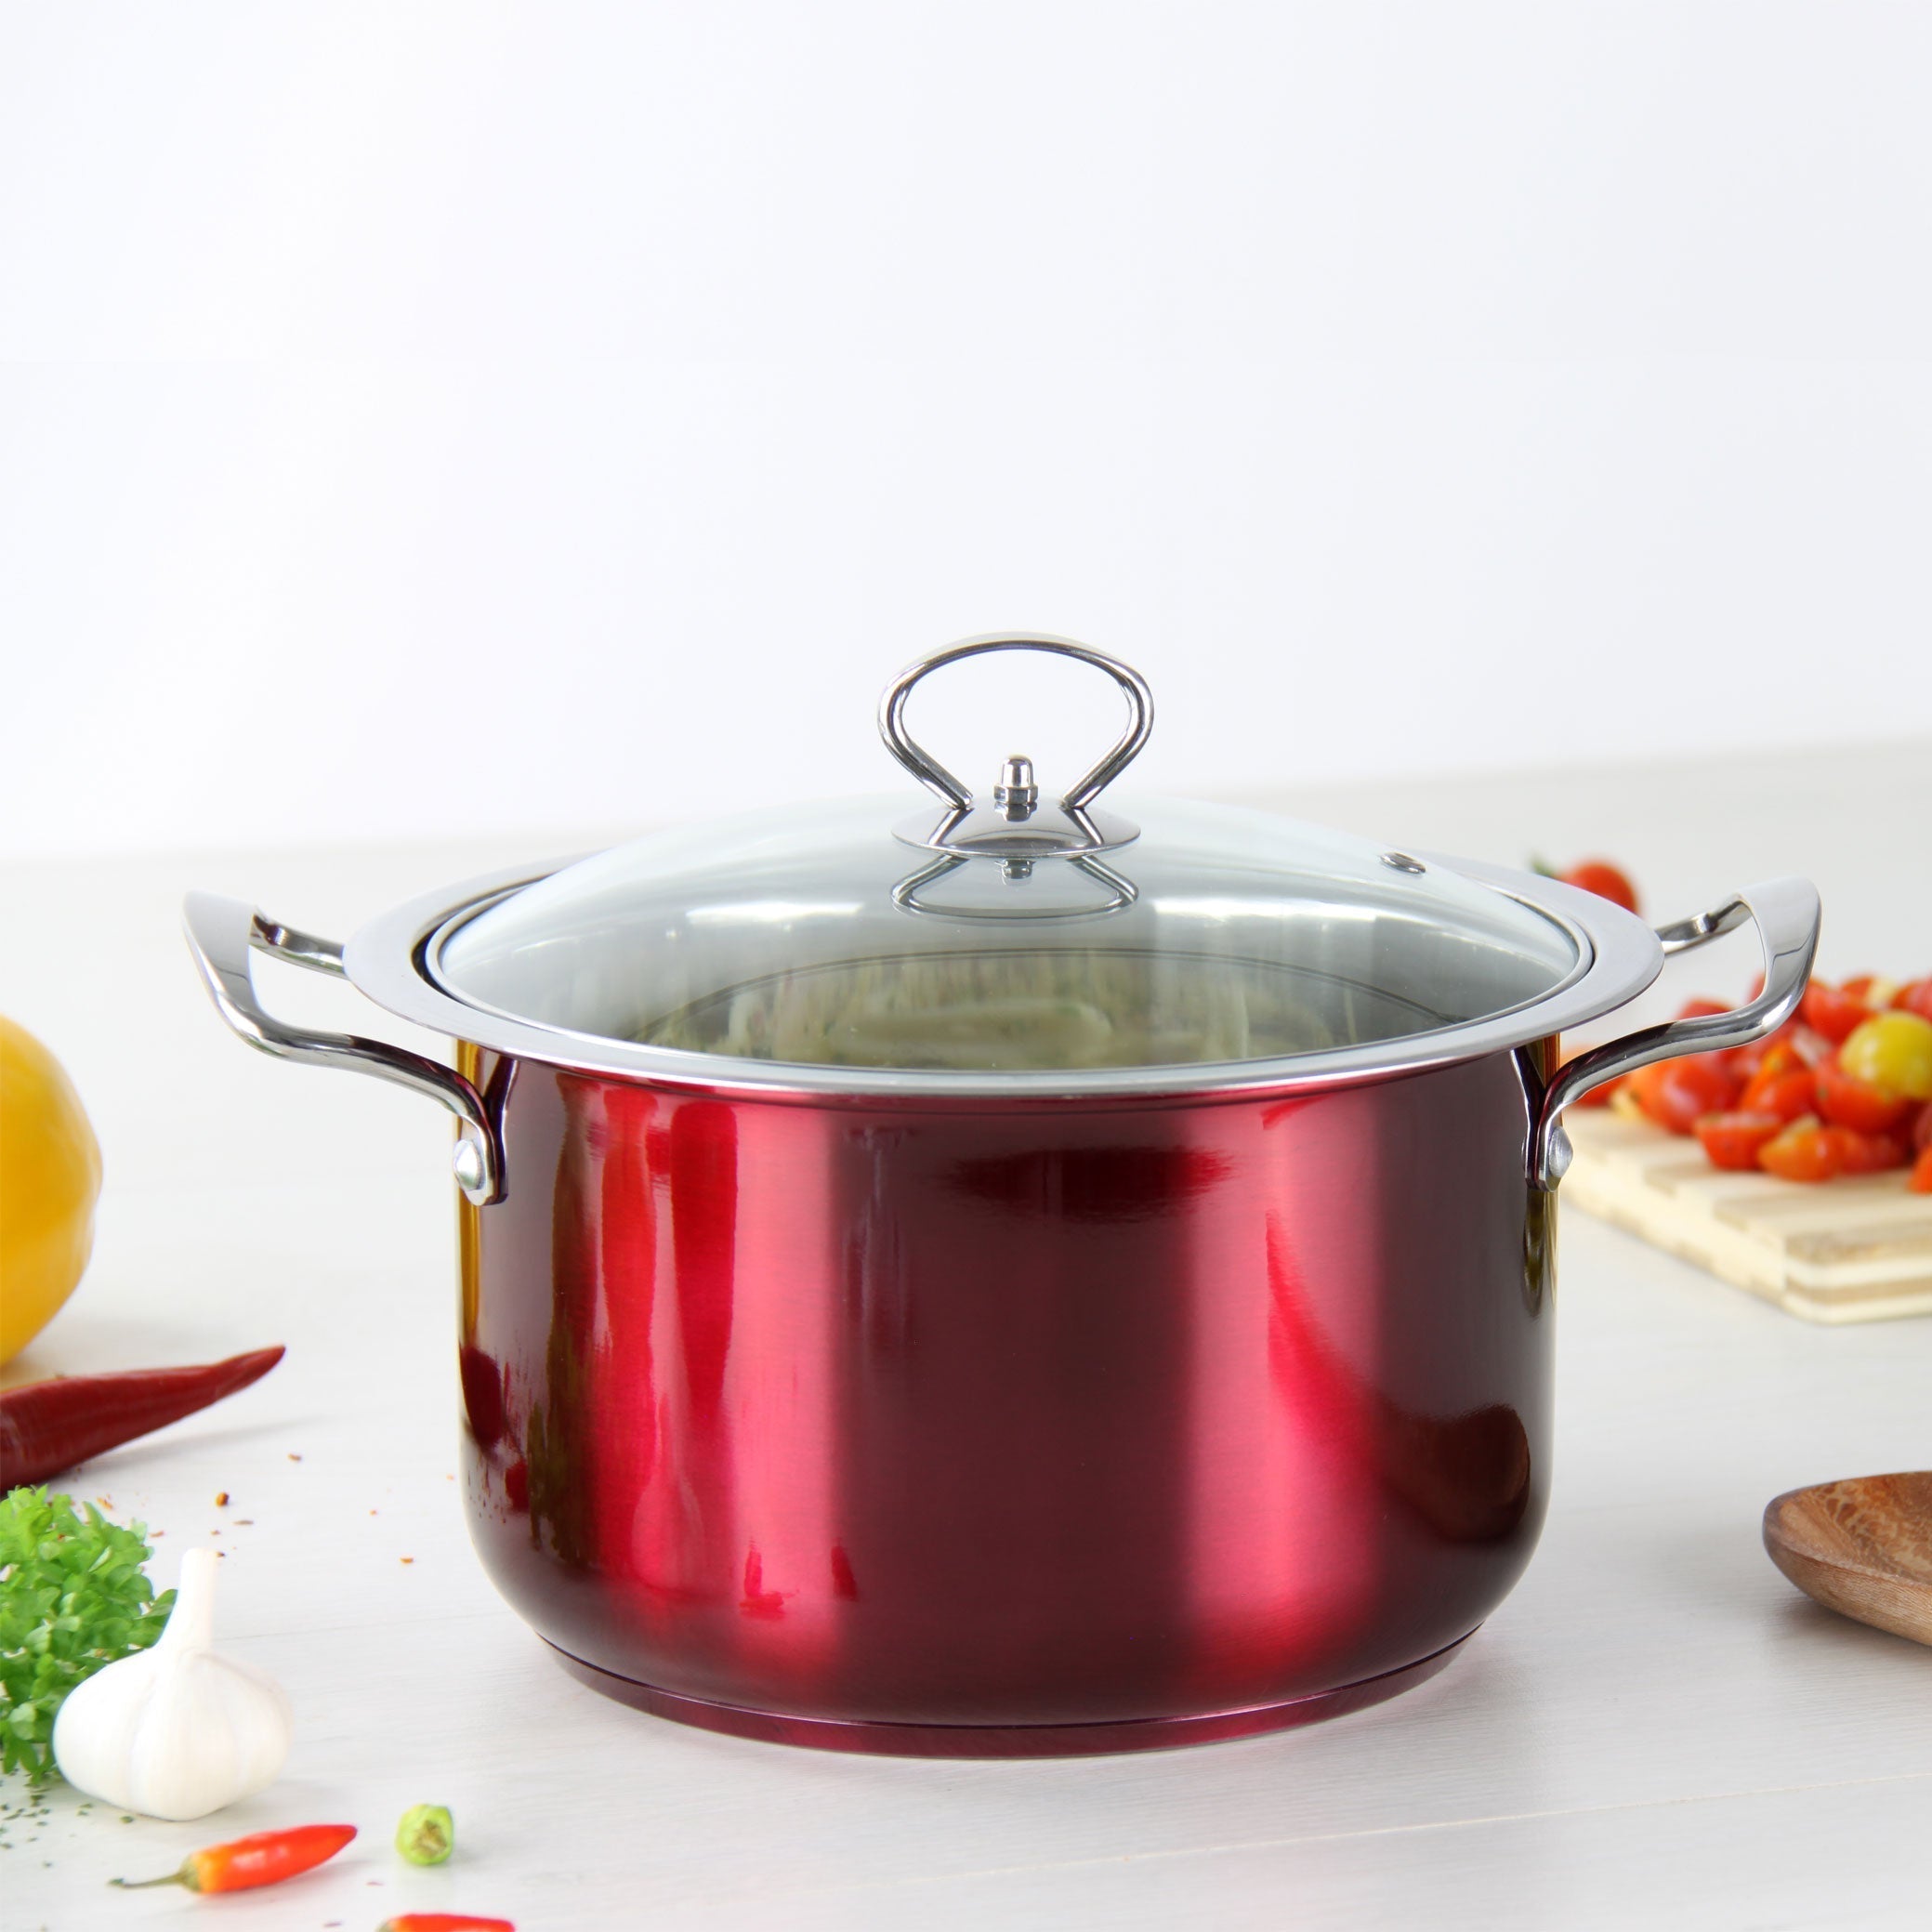 Stainless Steel Stockpot - Induction Base - RUBY -26cm